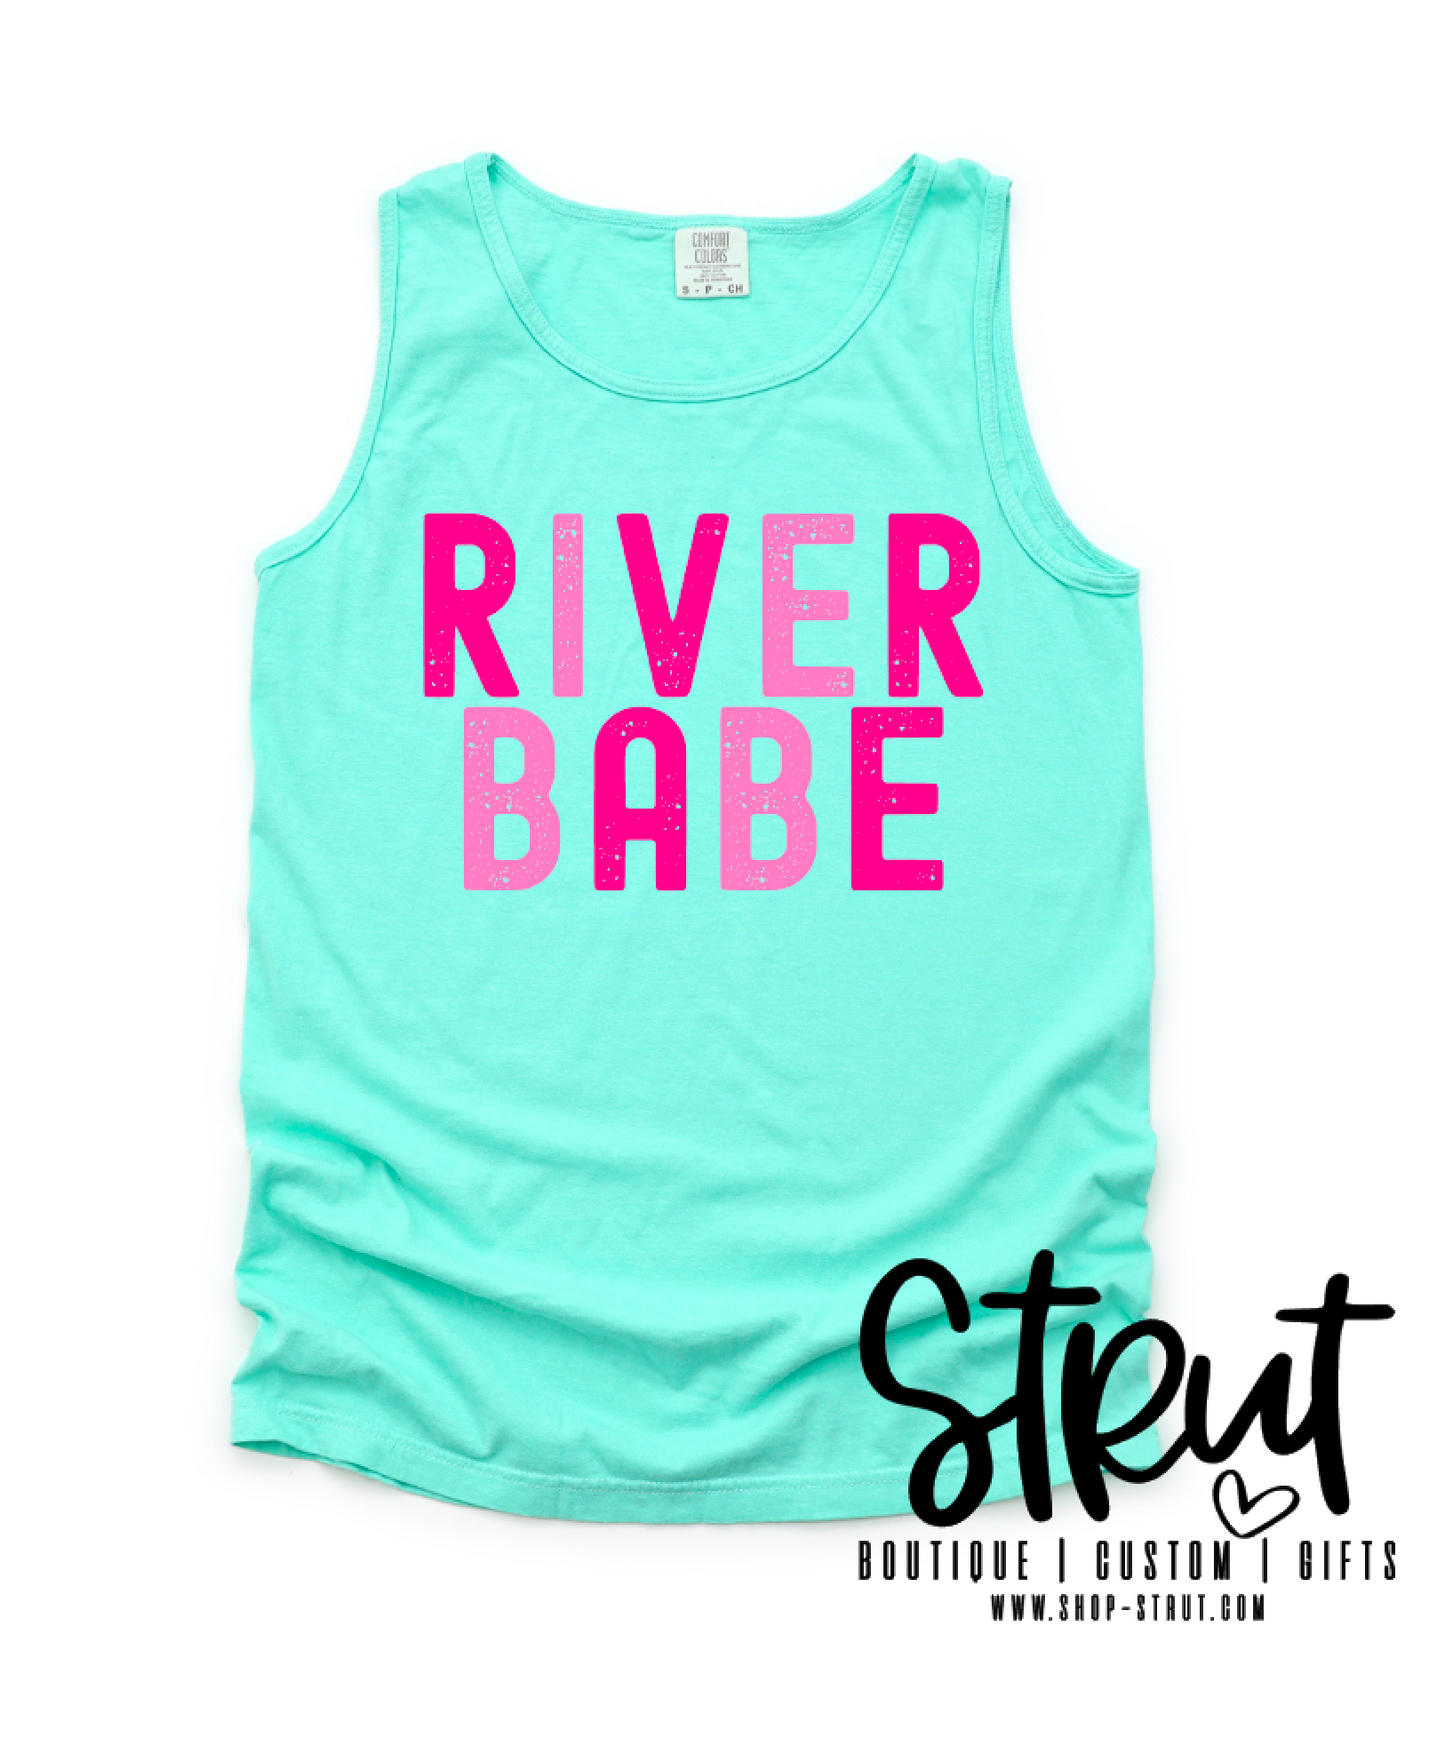 River Babe - Tank or Tee